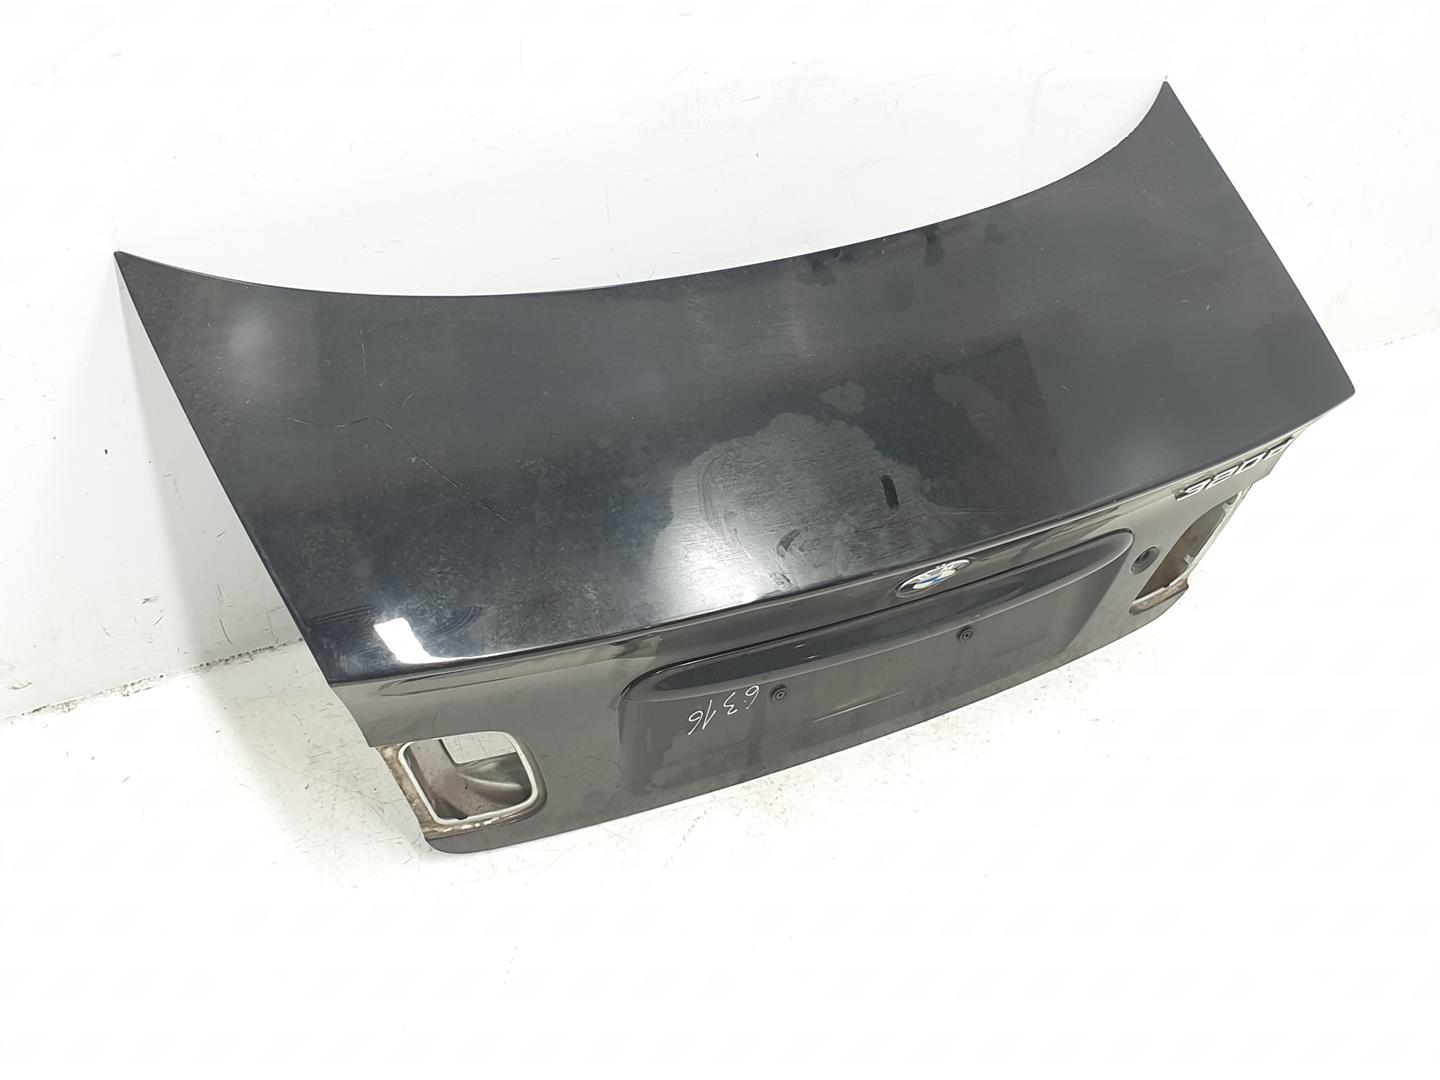 BMW 3 Series E46 (1997-2006) Bootlid Rear Boot 41627003314, 41627003314, COLORNEGRO345 24244546